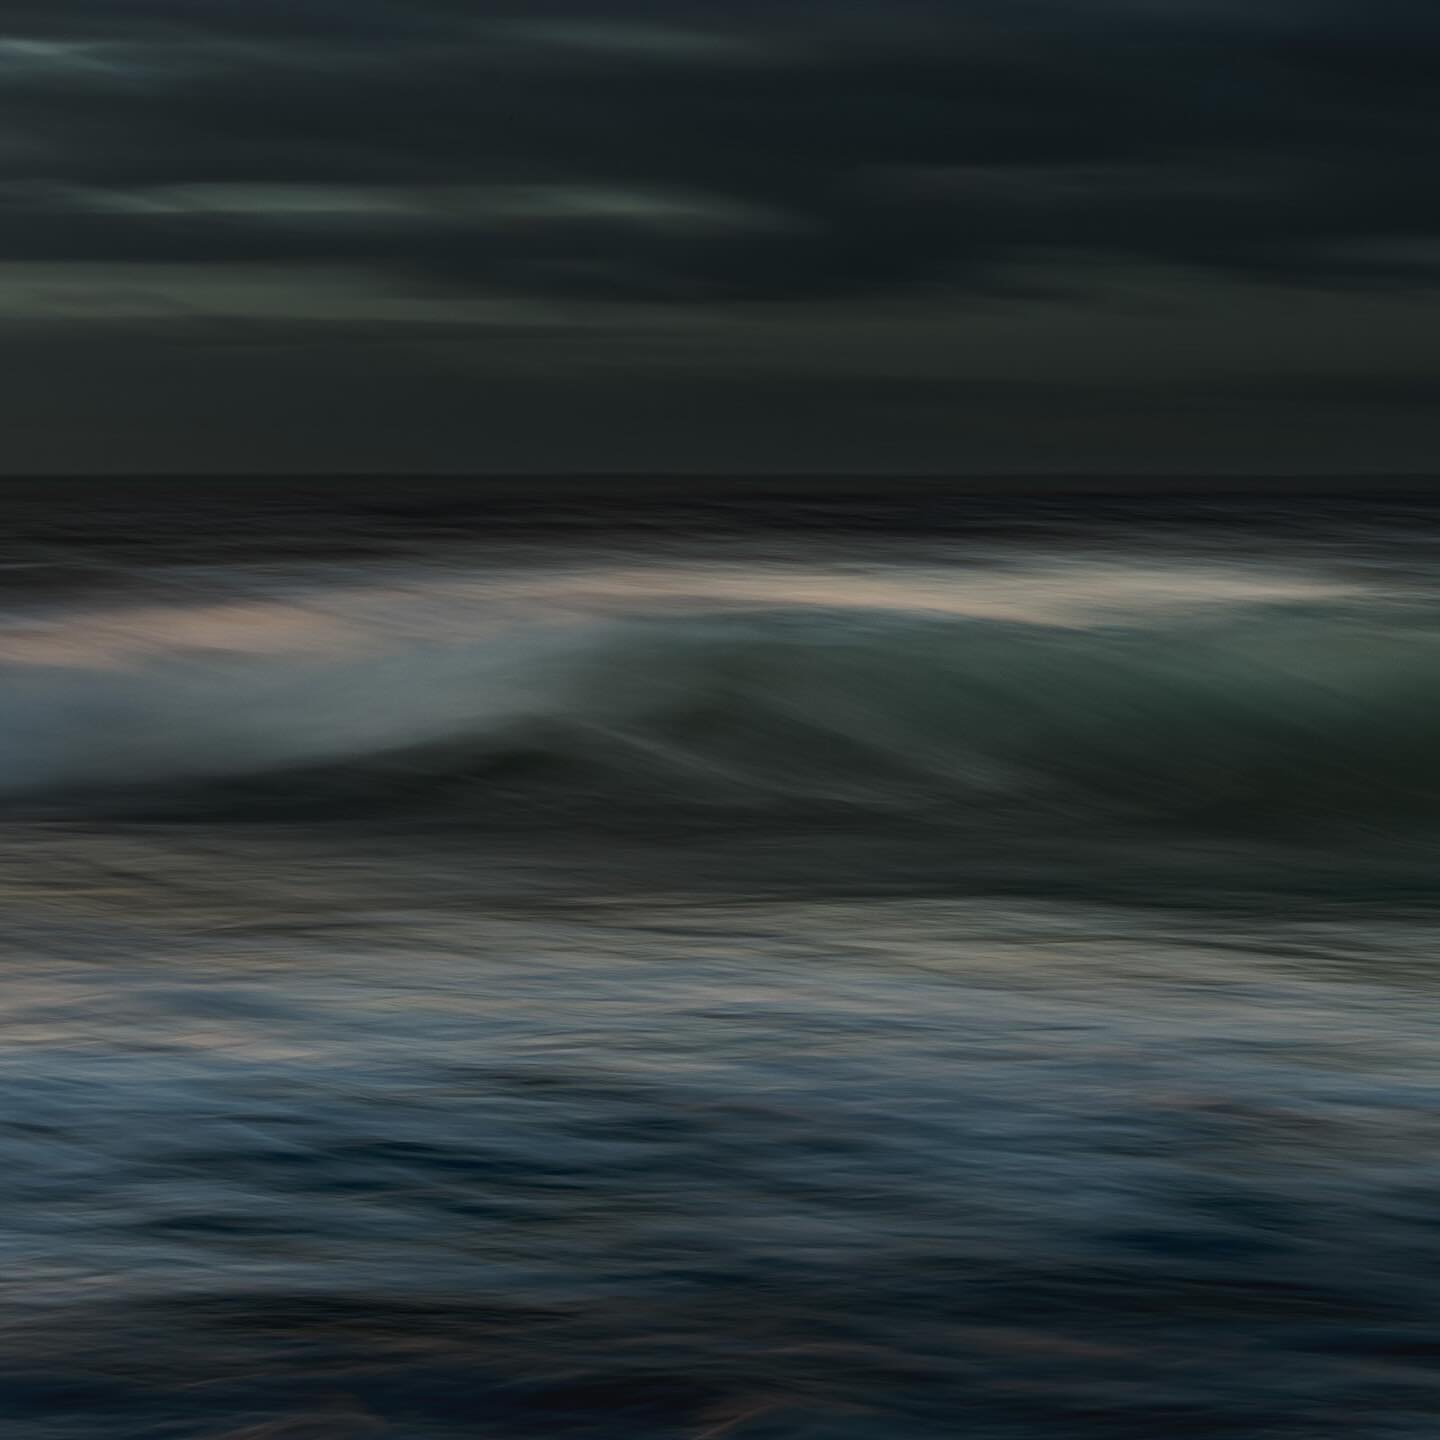 A wave rolls in from a distant storm. As the seabed grows shallow, it tumbles upon itself in a poetic concert of dissipating energy.

The wind-borne journey ends.

I like to capture adjacent moments in a single frame, to hold the fragments of what I 